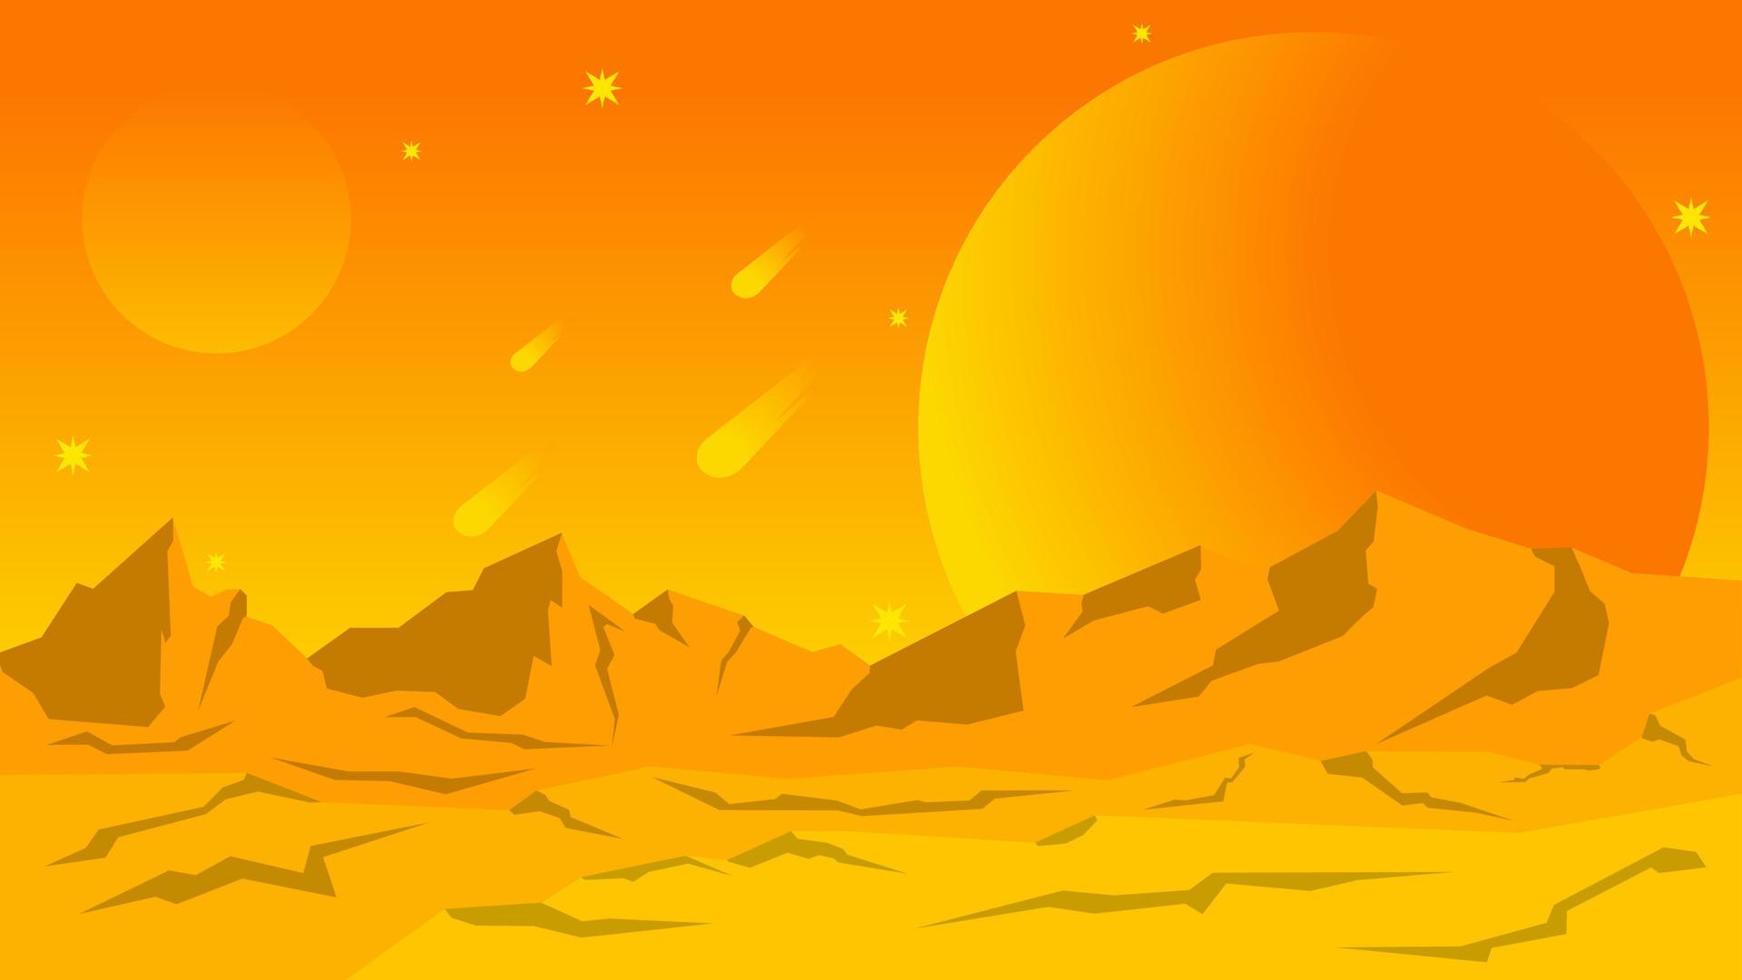 Science fiction landscape vector illustration. Orange yellow desert planet landscape space view. Fiction galaxy with sun and moon. Science fiction vector for background, wallpaper or illustration